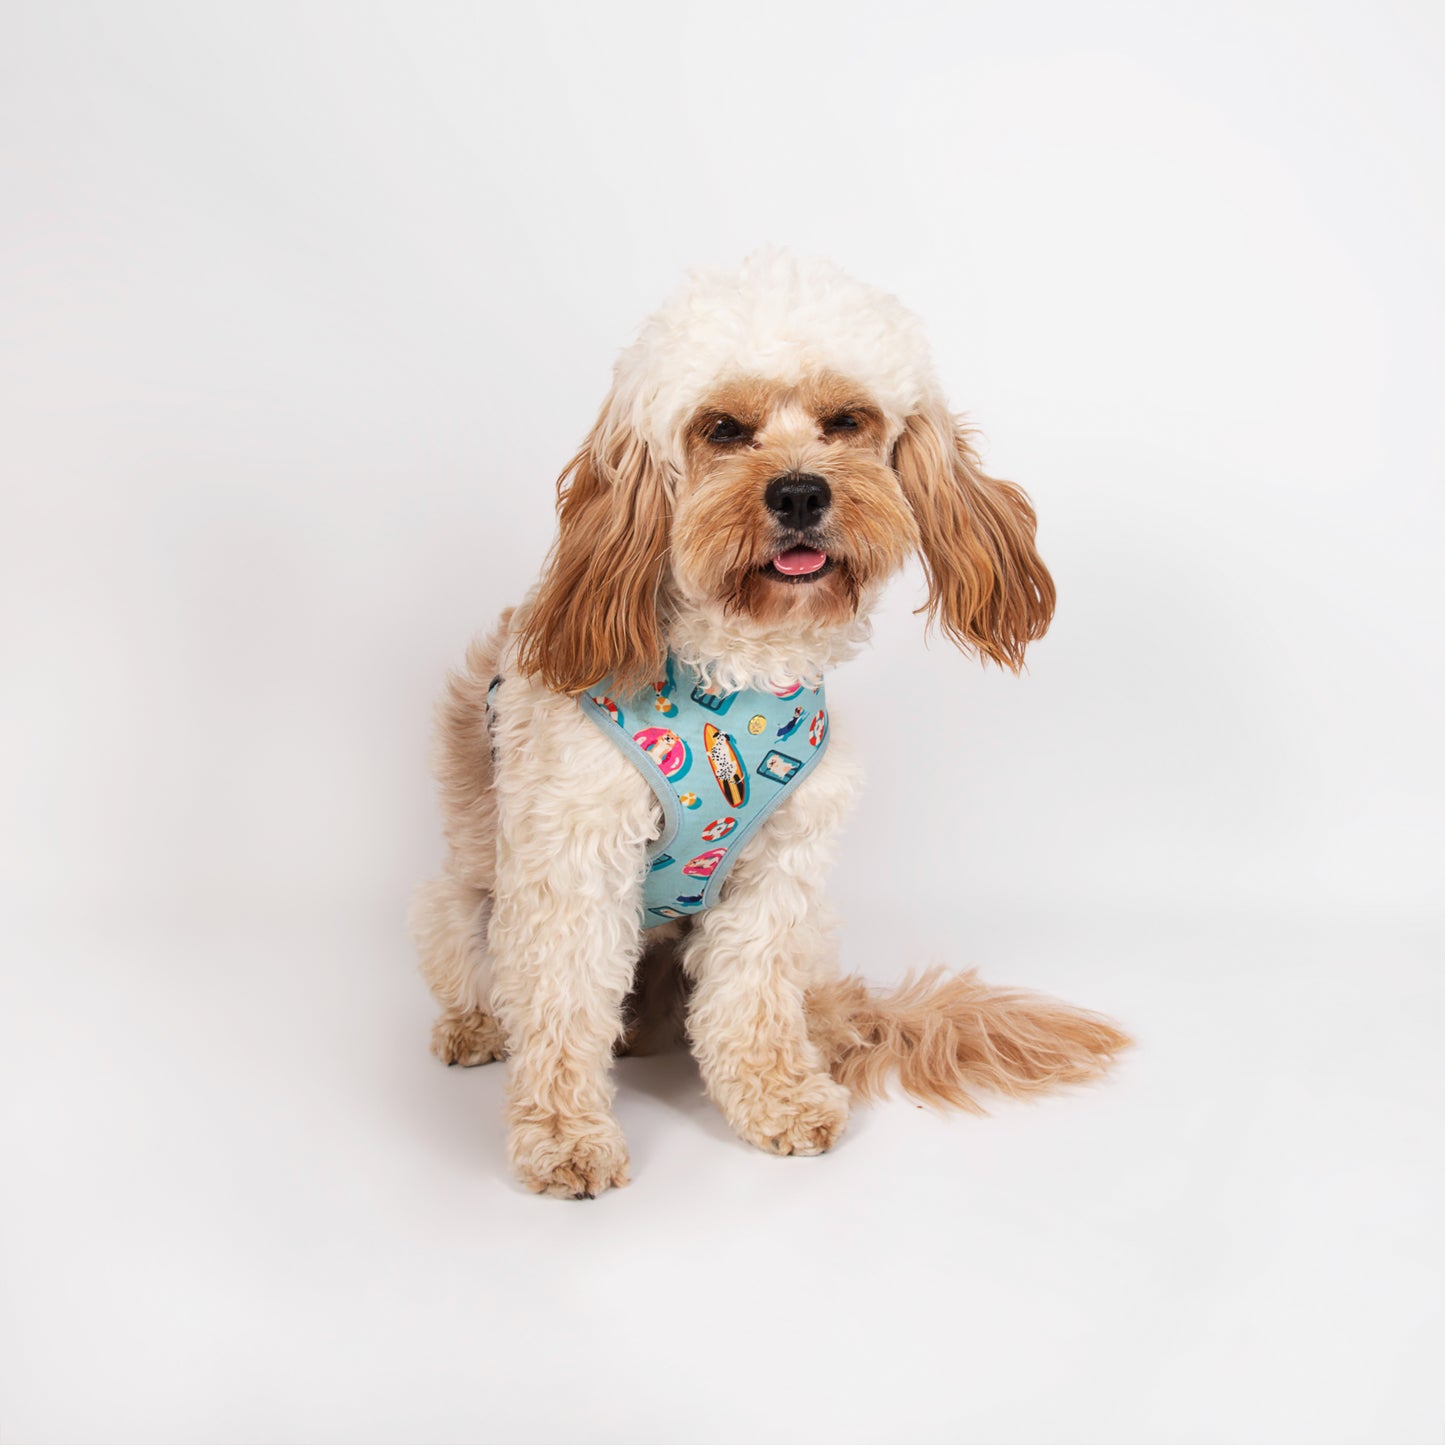 Pata Paw pool pups harness as seen on a medium-sized dog, Noberto, a cavapoo